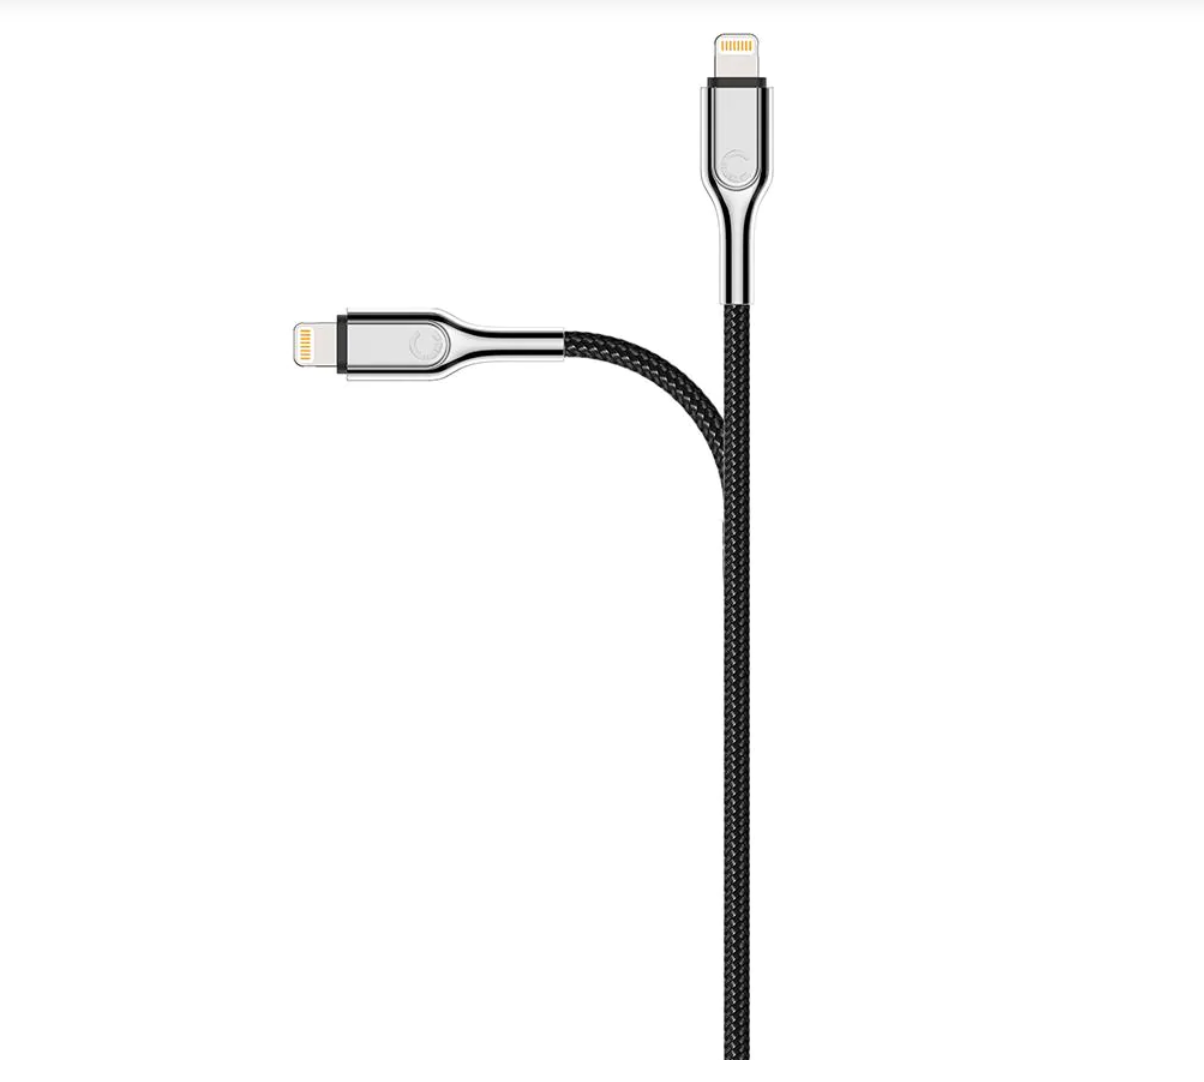 Cygnett Armoured Lightning to USB-A Cable 1M